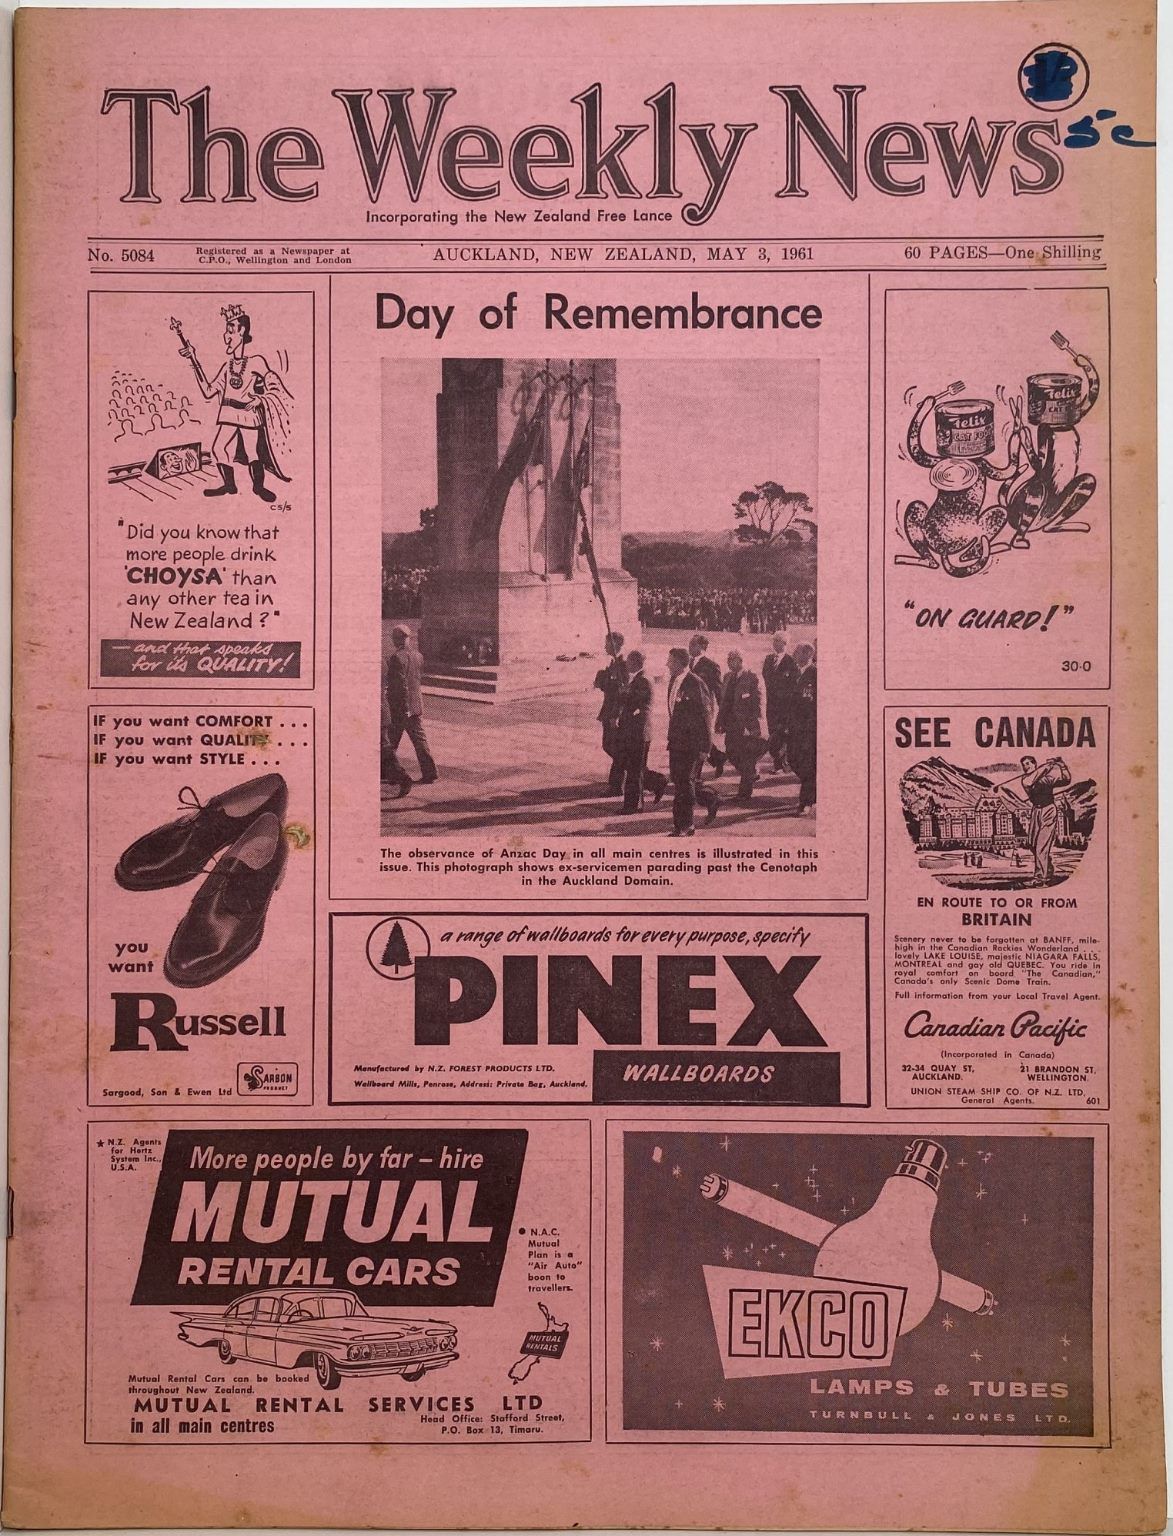 OLD NEWSPAPER: The Weekly News, 3 May 1961